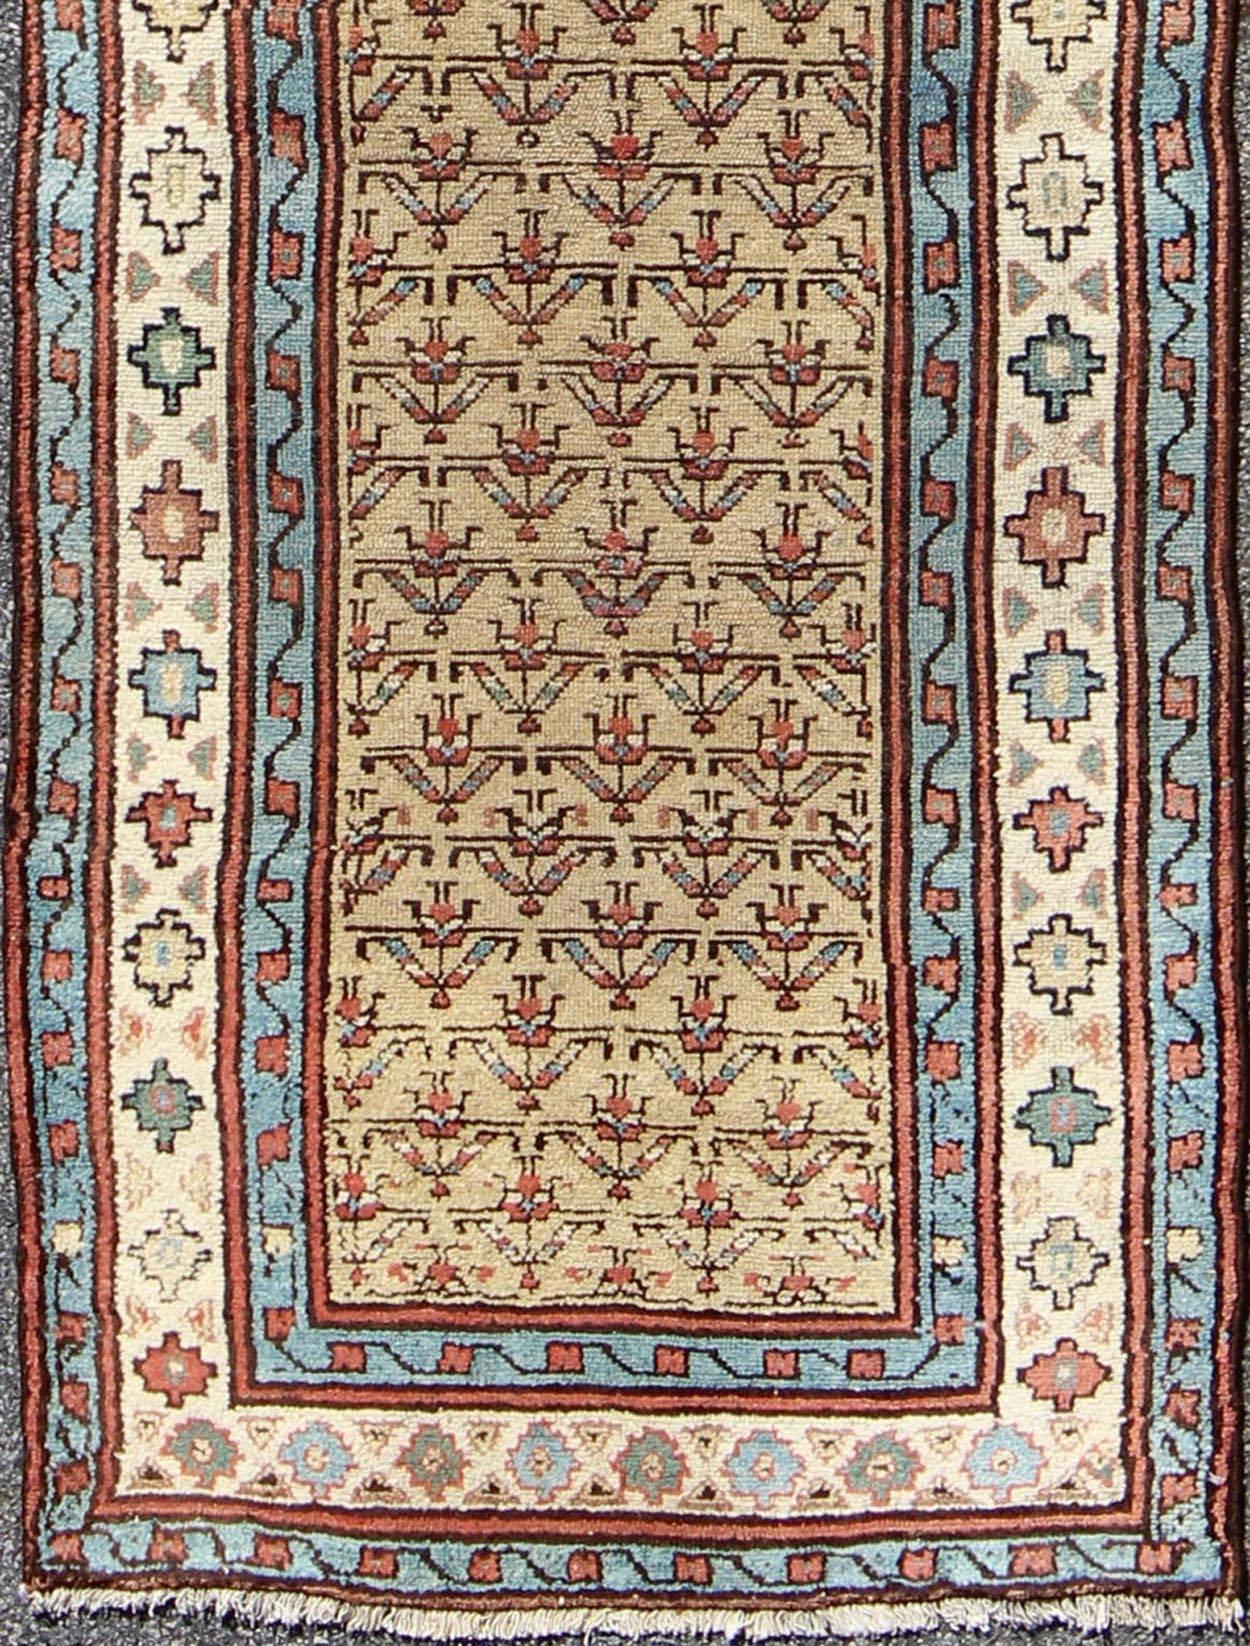 Early 20th century tribal antique Serab runner with all-over pattern in wheat, rug l11-0913, country of origin / type: Iran / Tribal, circa 1900

This unique antique Serab runner from early 20th century Iran features a wheat-colored field and